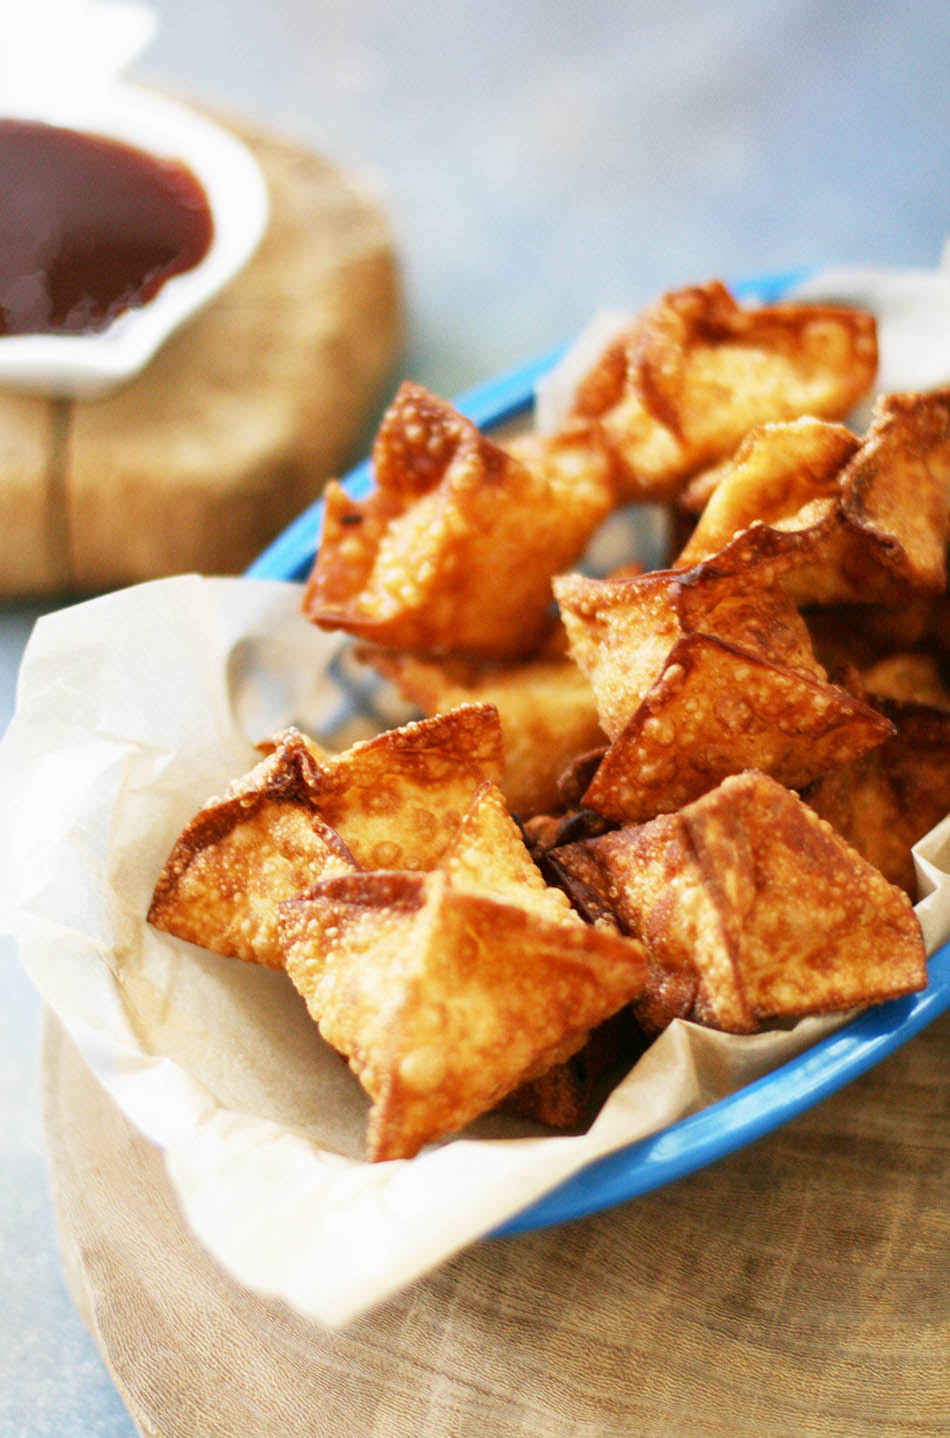 Crab rangoons: Cream cheese wontons, elevated with the addition of crab meat and seasonings.